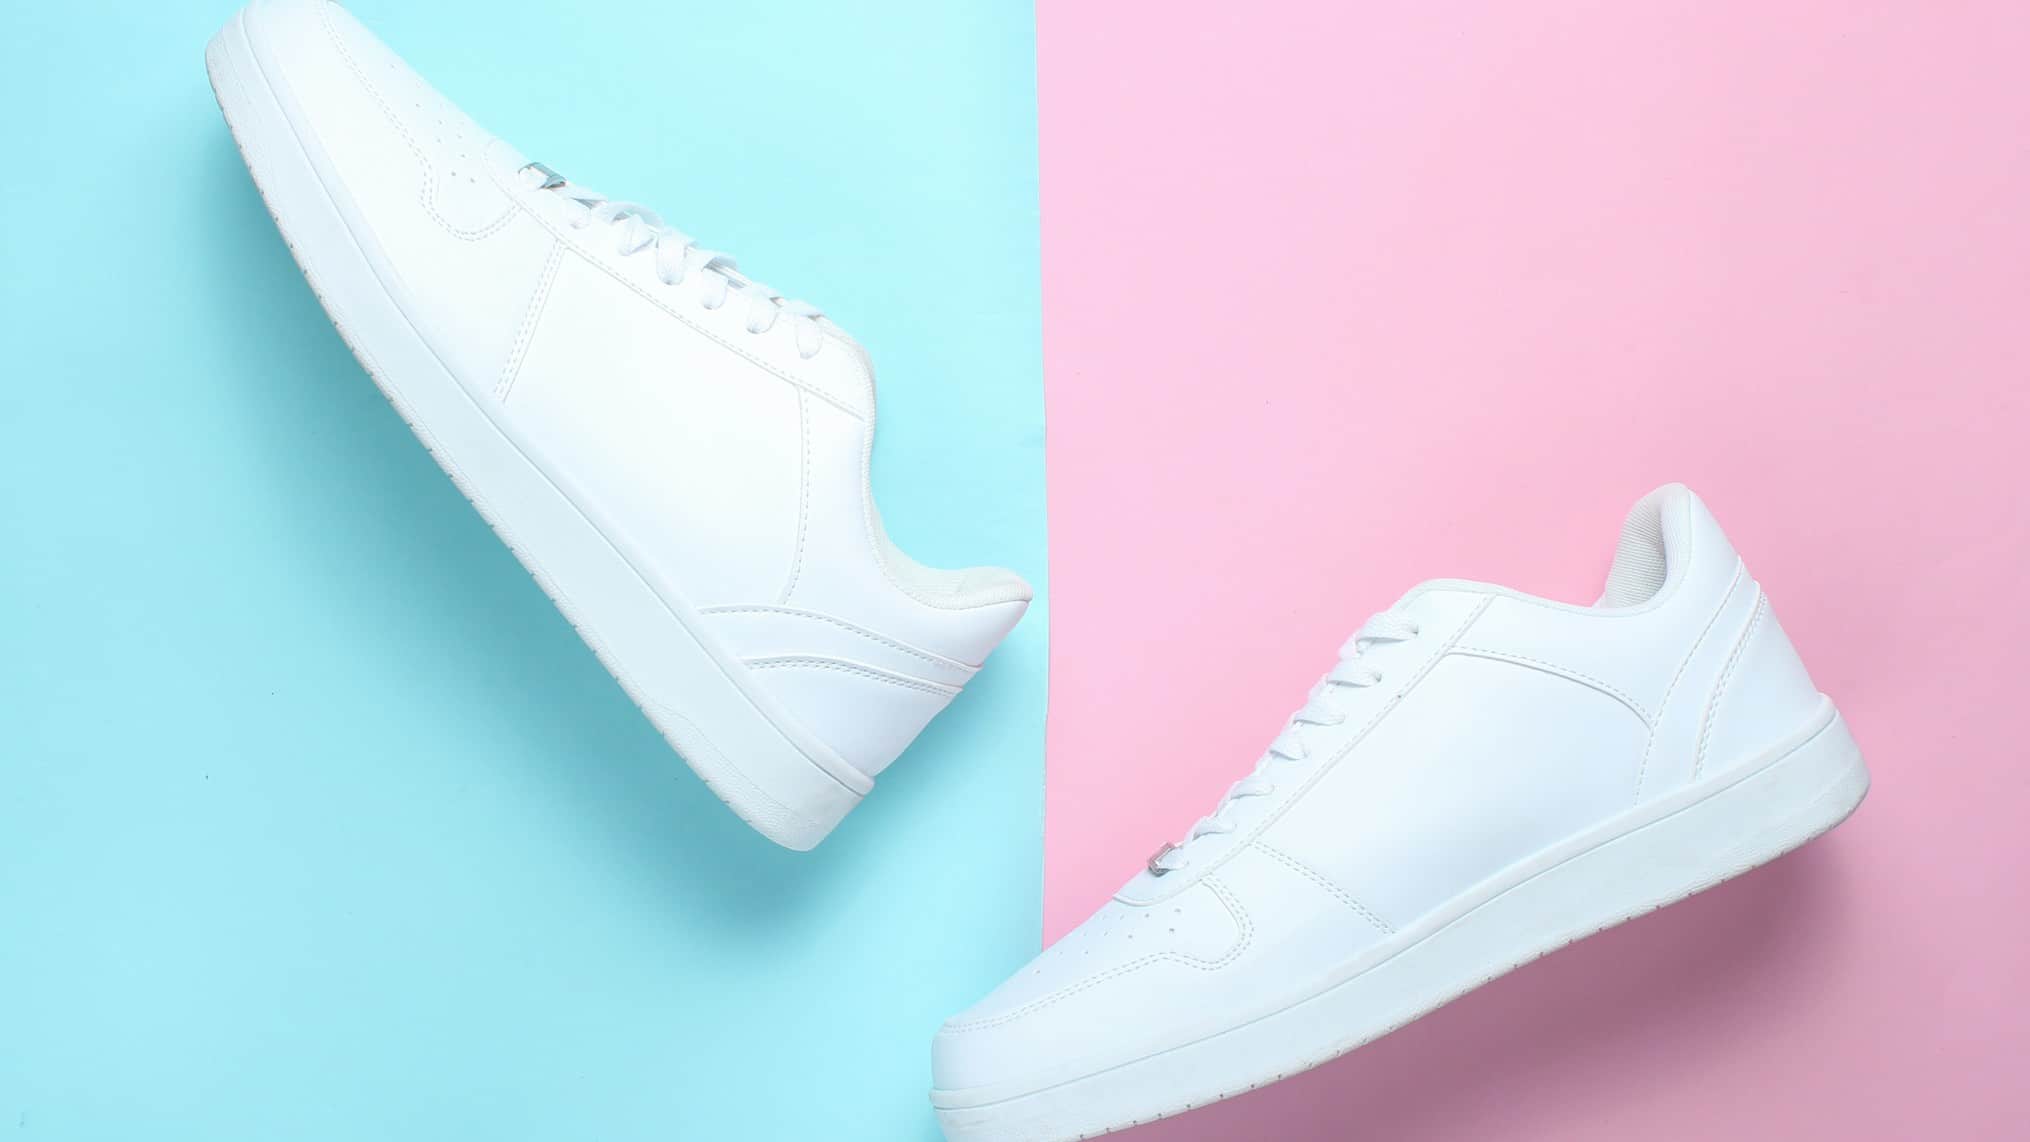 shoes asx share price represented by white shoes against pink and blue background AX1 share price downgrade